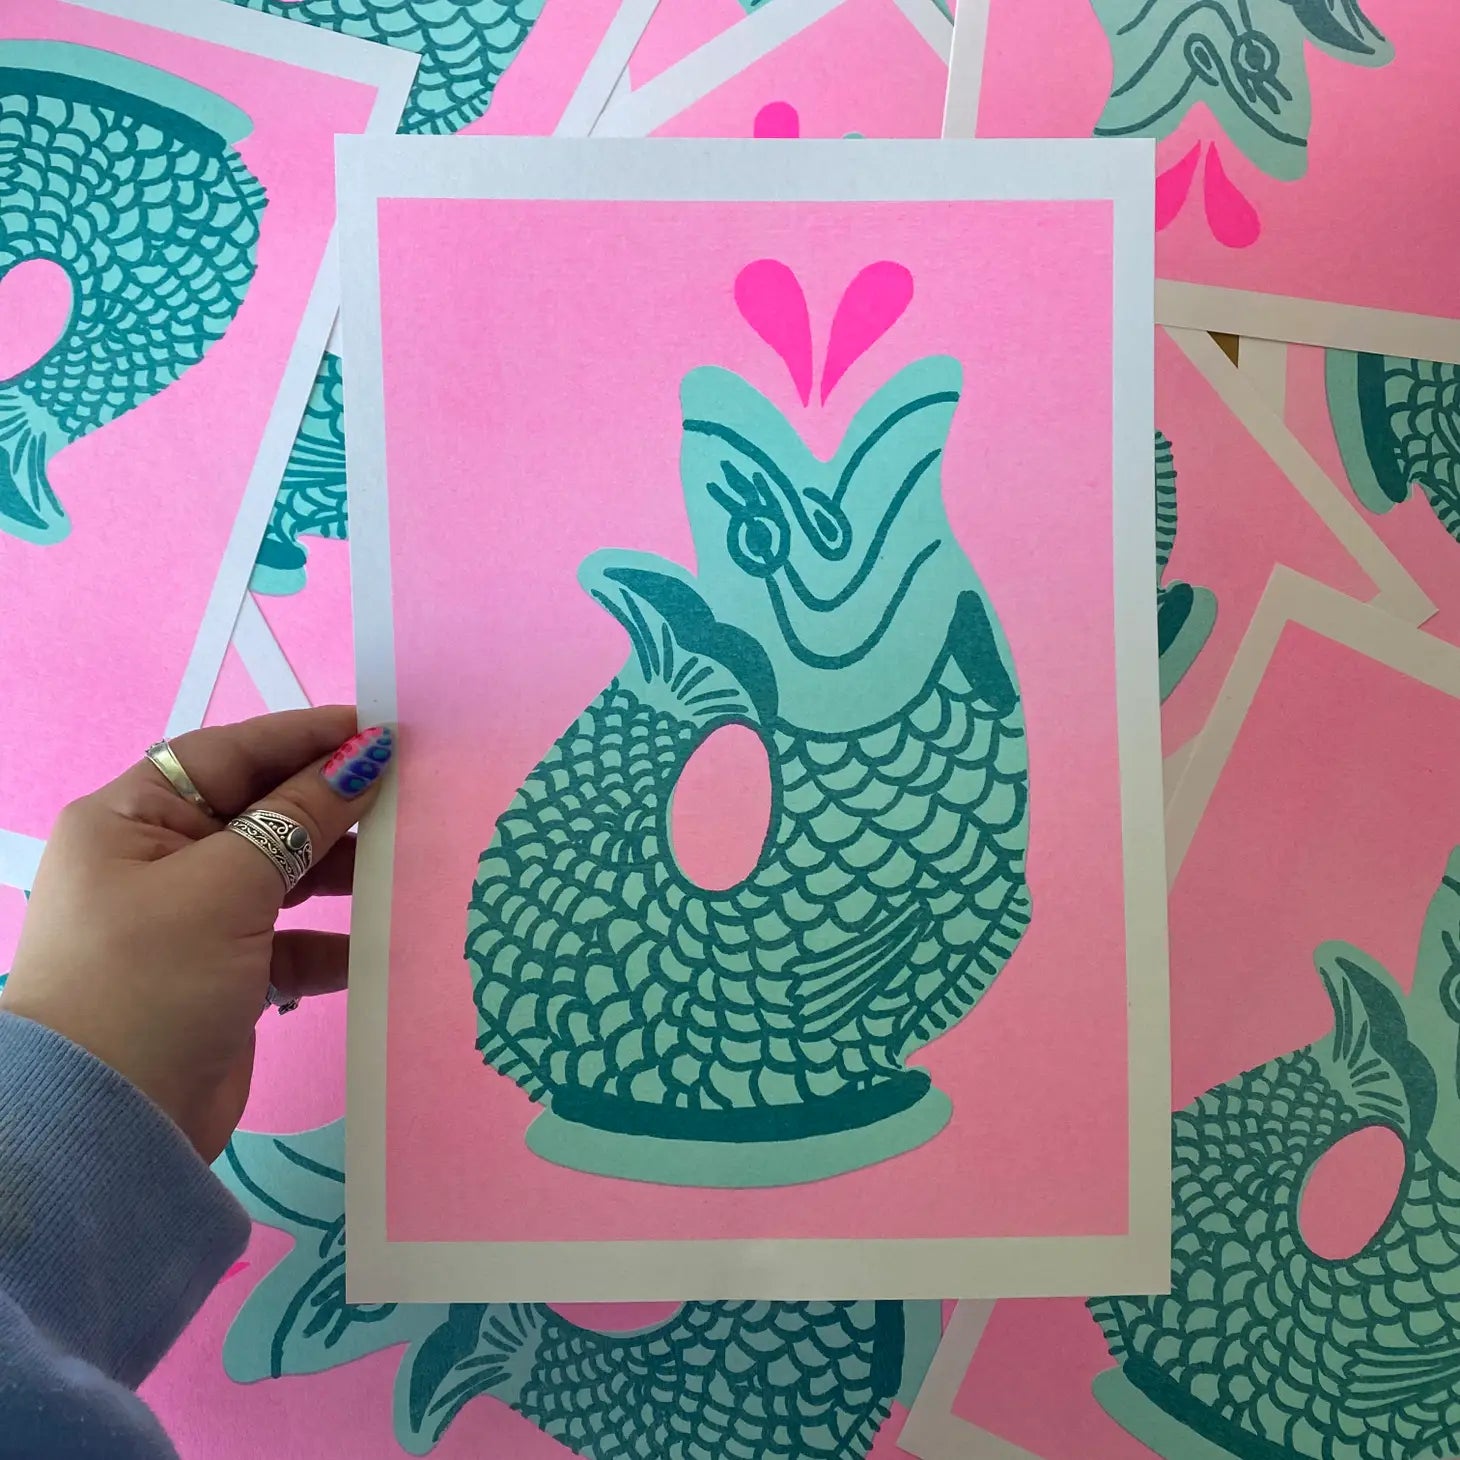 handmade print glugjug by Amy Hastings, neon pink background with green spurting fish vase